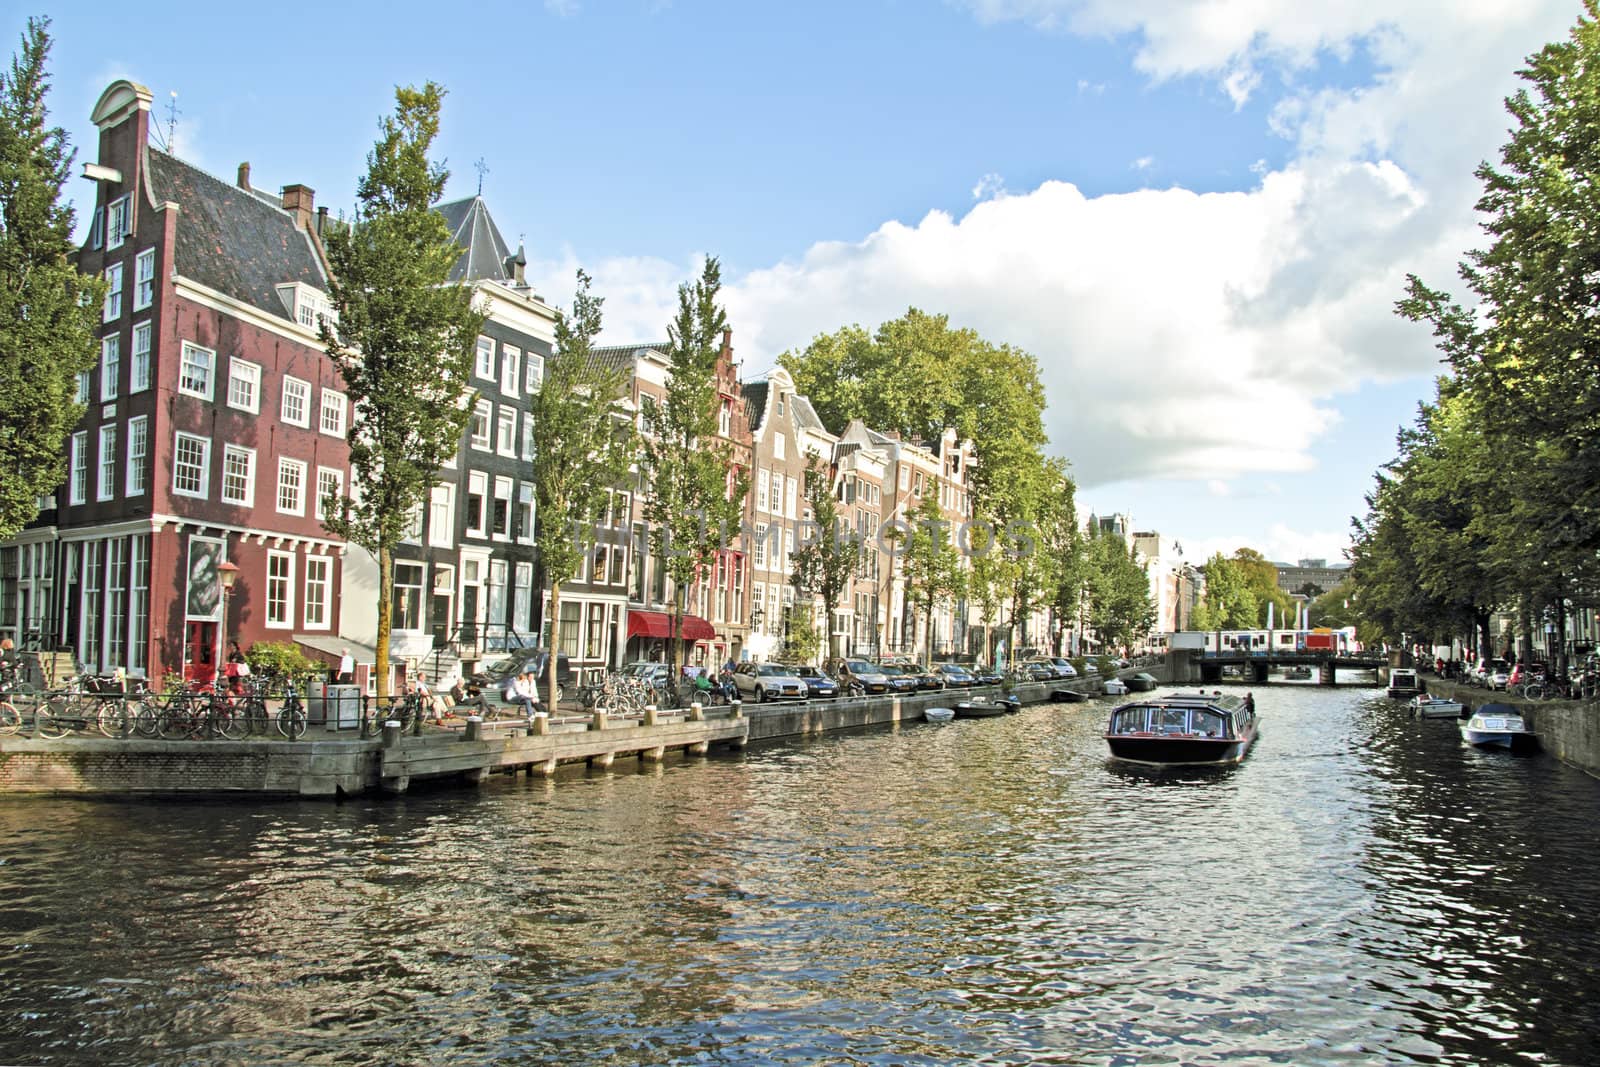 City scenic from Amsterdam in the Netherlands by devy